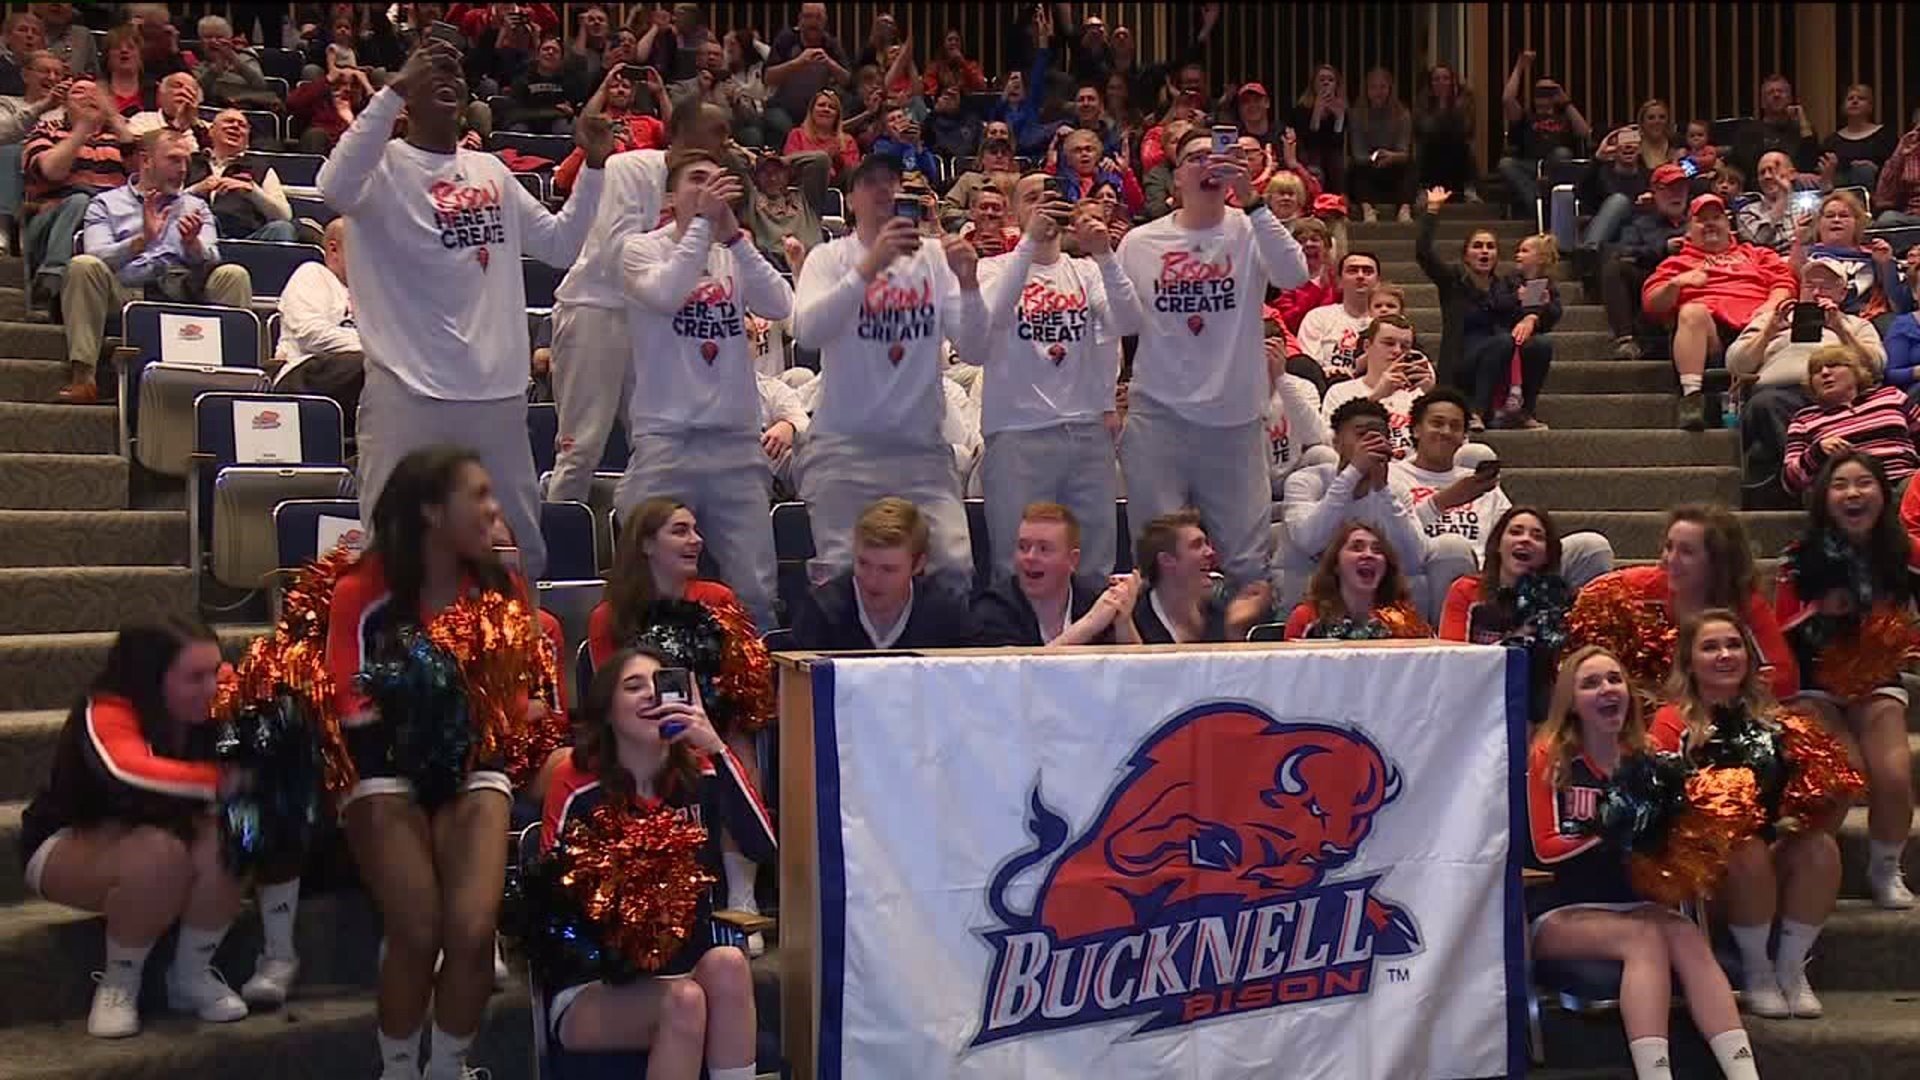 Bucknell Earns 14 Seed, Will Face Michigan State in NCAA Tournament